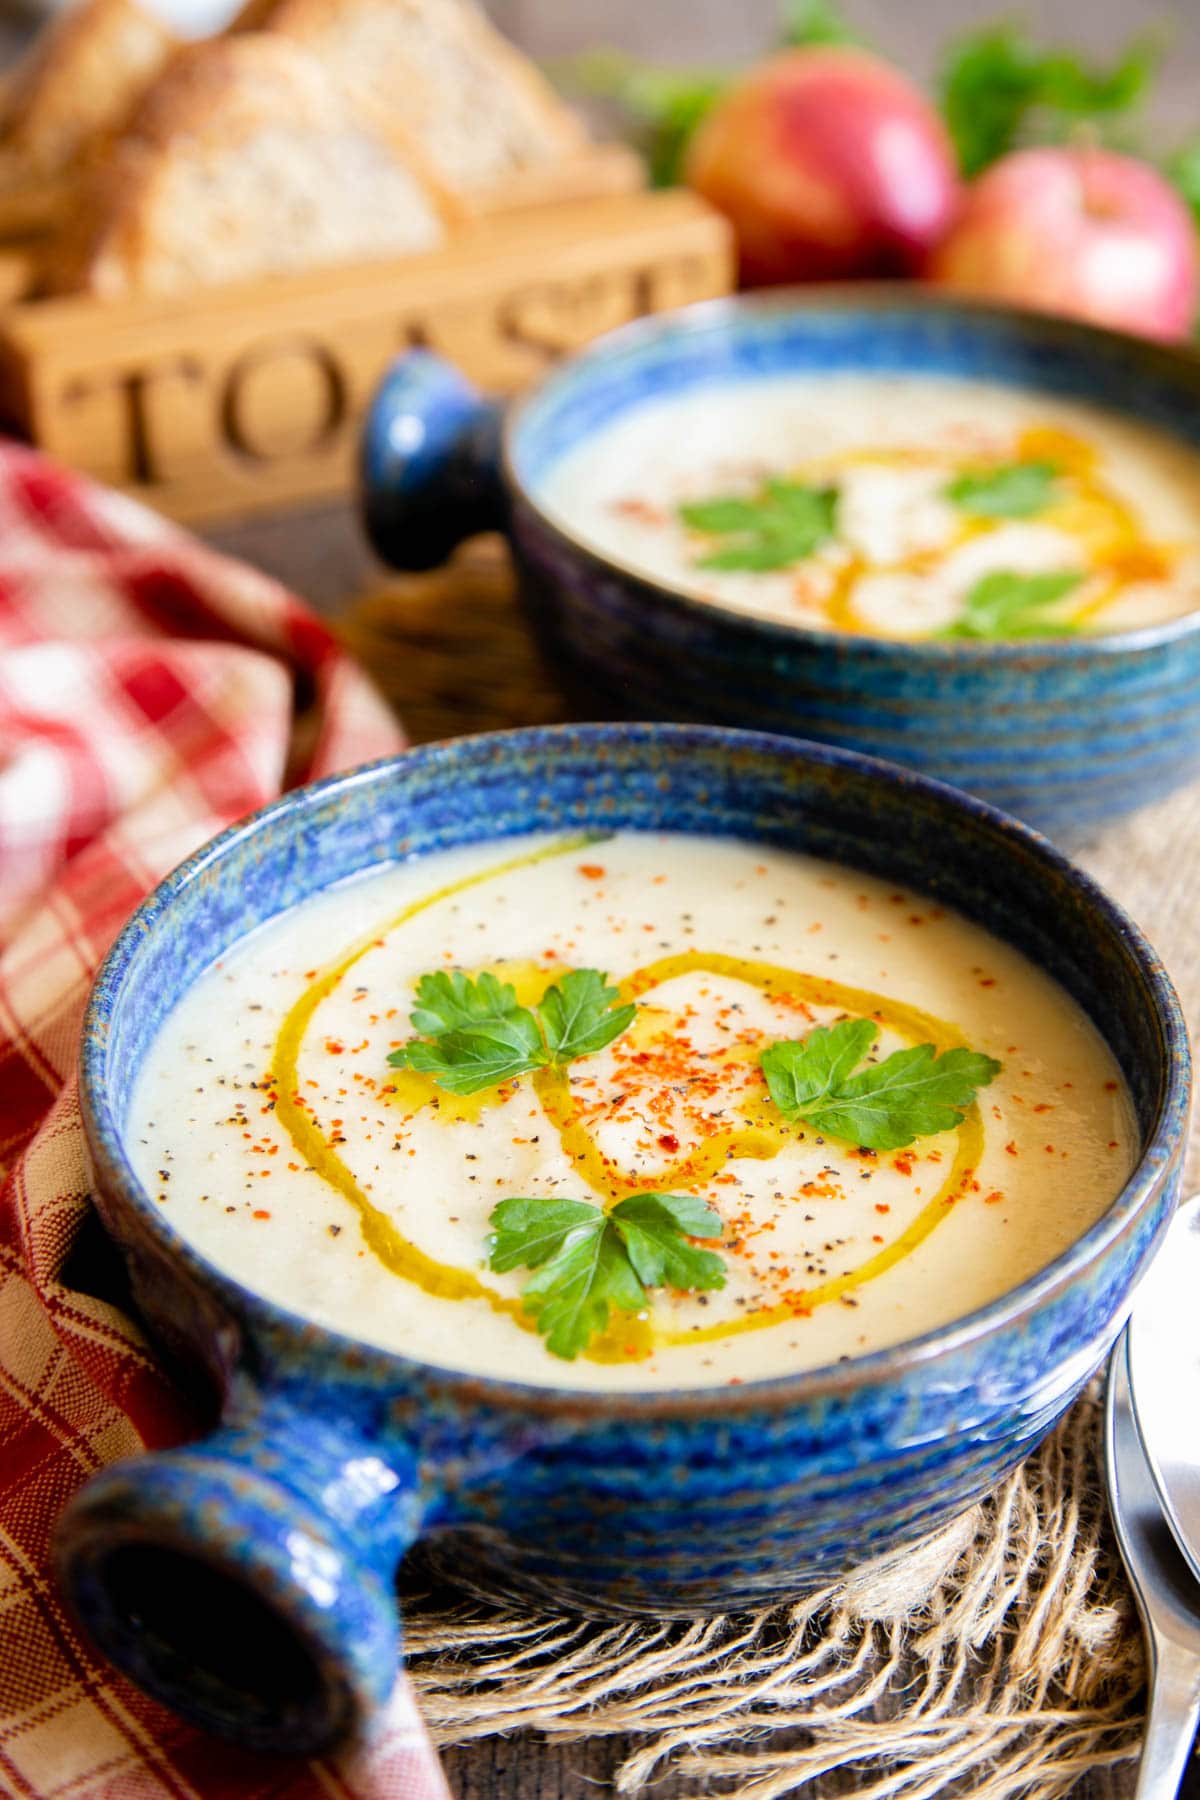 Fresh and delicious - parsnip and apple soup served with a drizzle of oil, a sprinkling of spice and some fresh herbs.